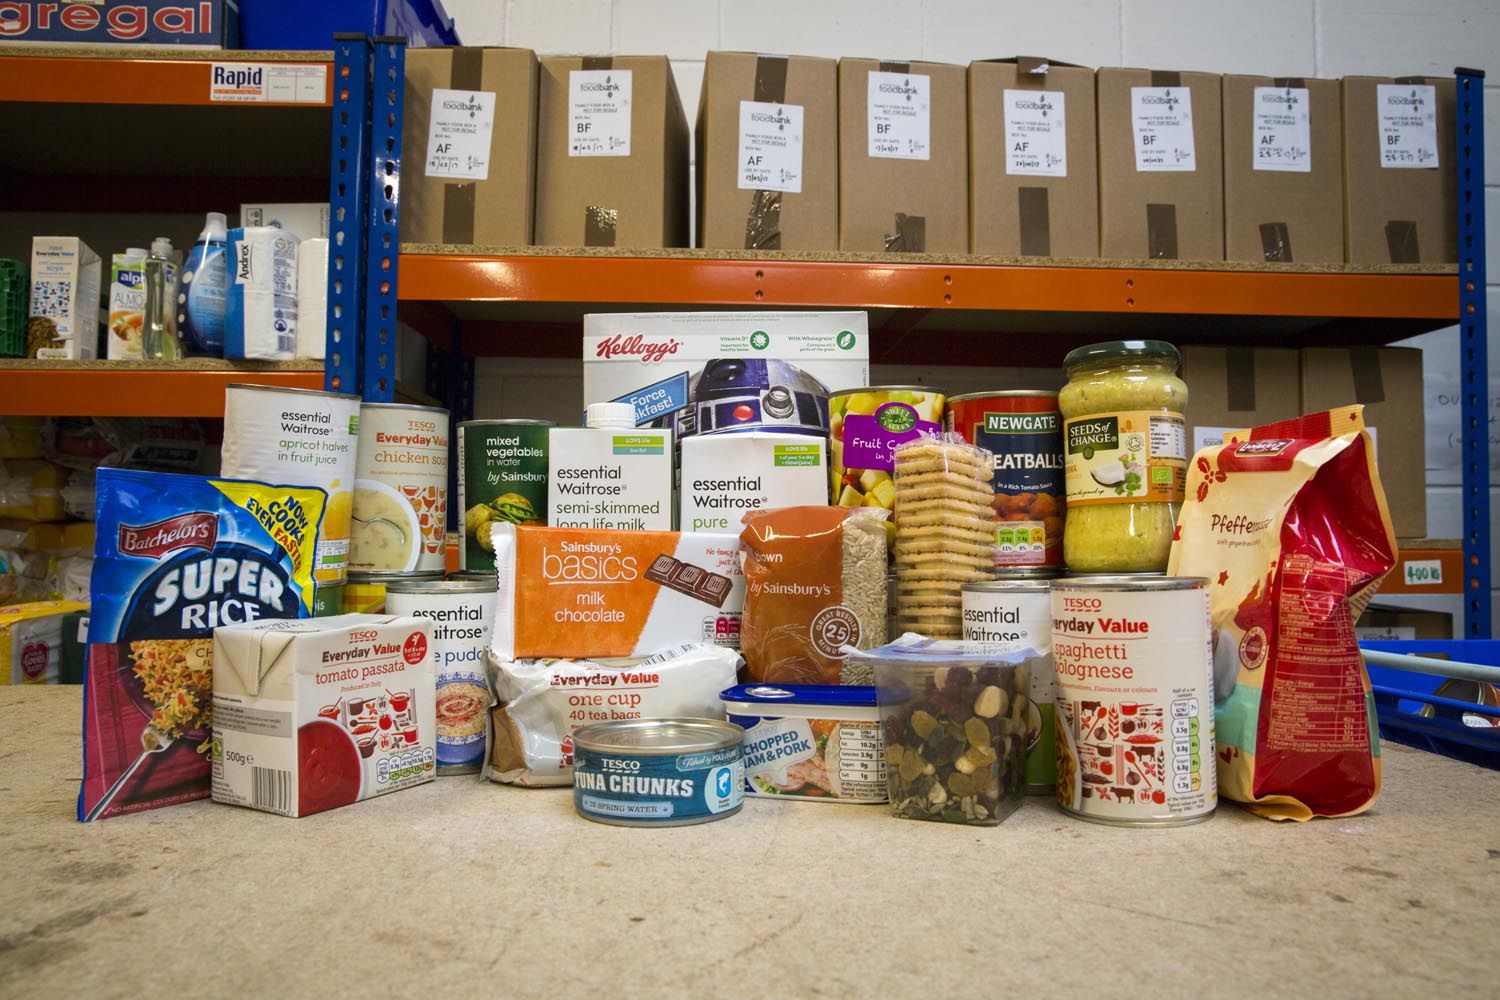 Trussell Trust. Food bank